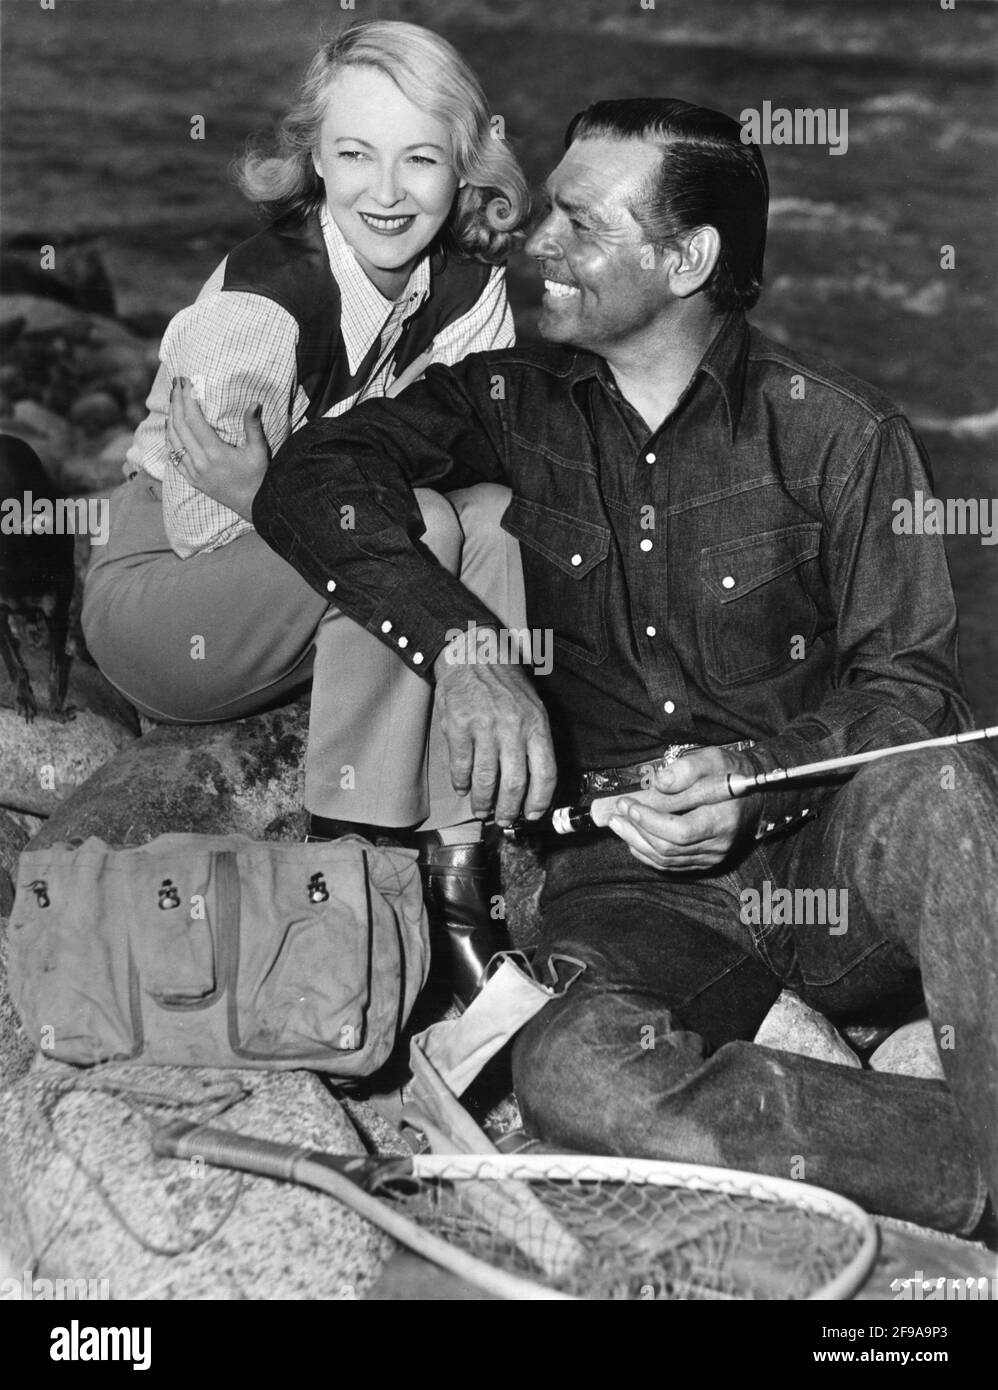 CLARK GABLE and his 4th Wife SYLVIA ASHLEY on location candid in Colorado during filming of ACROSS THE WIDE MISSOURI 1951 director WILLIAM A. WELLMAN screenplay Talbot Jennings book Bernard DeVoto Metro Goldwyn Mayer Stock Photo